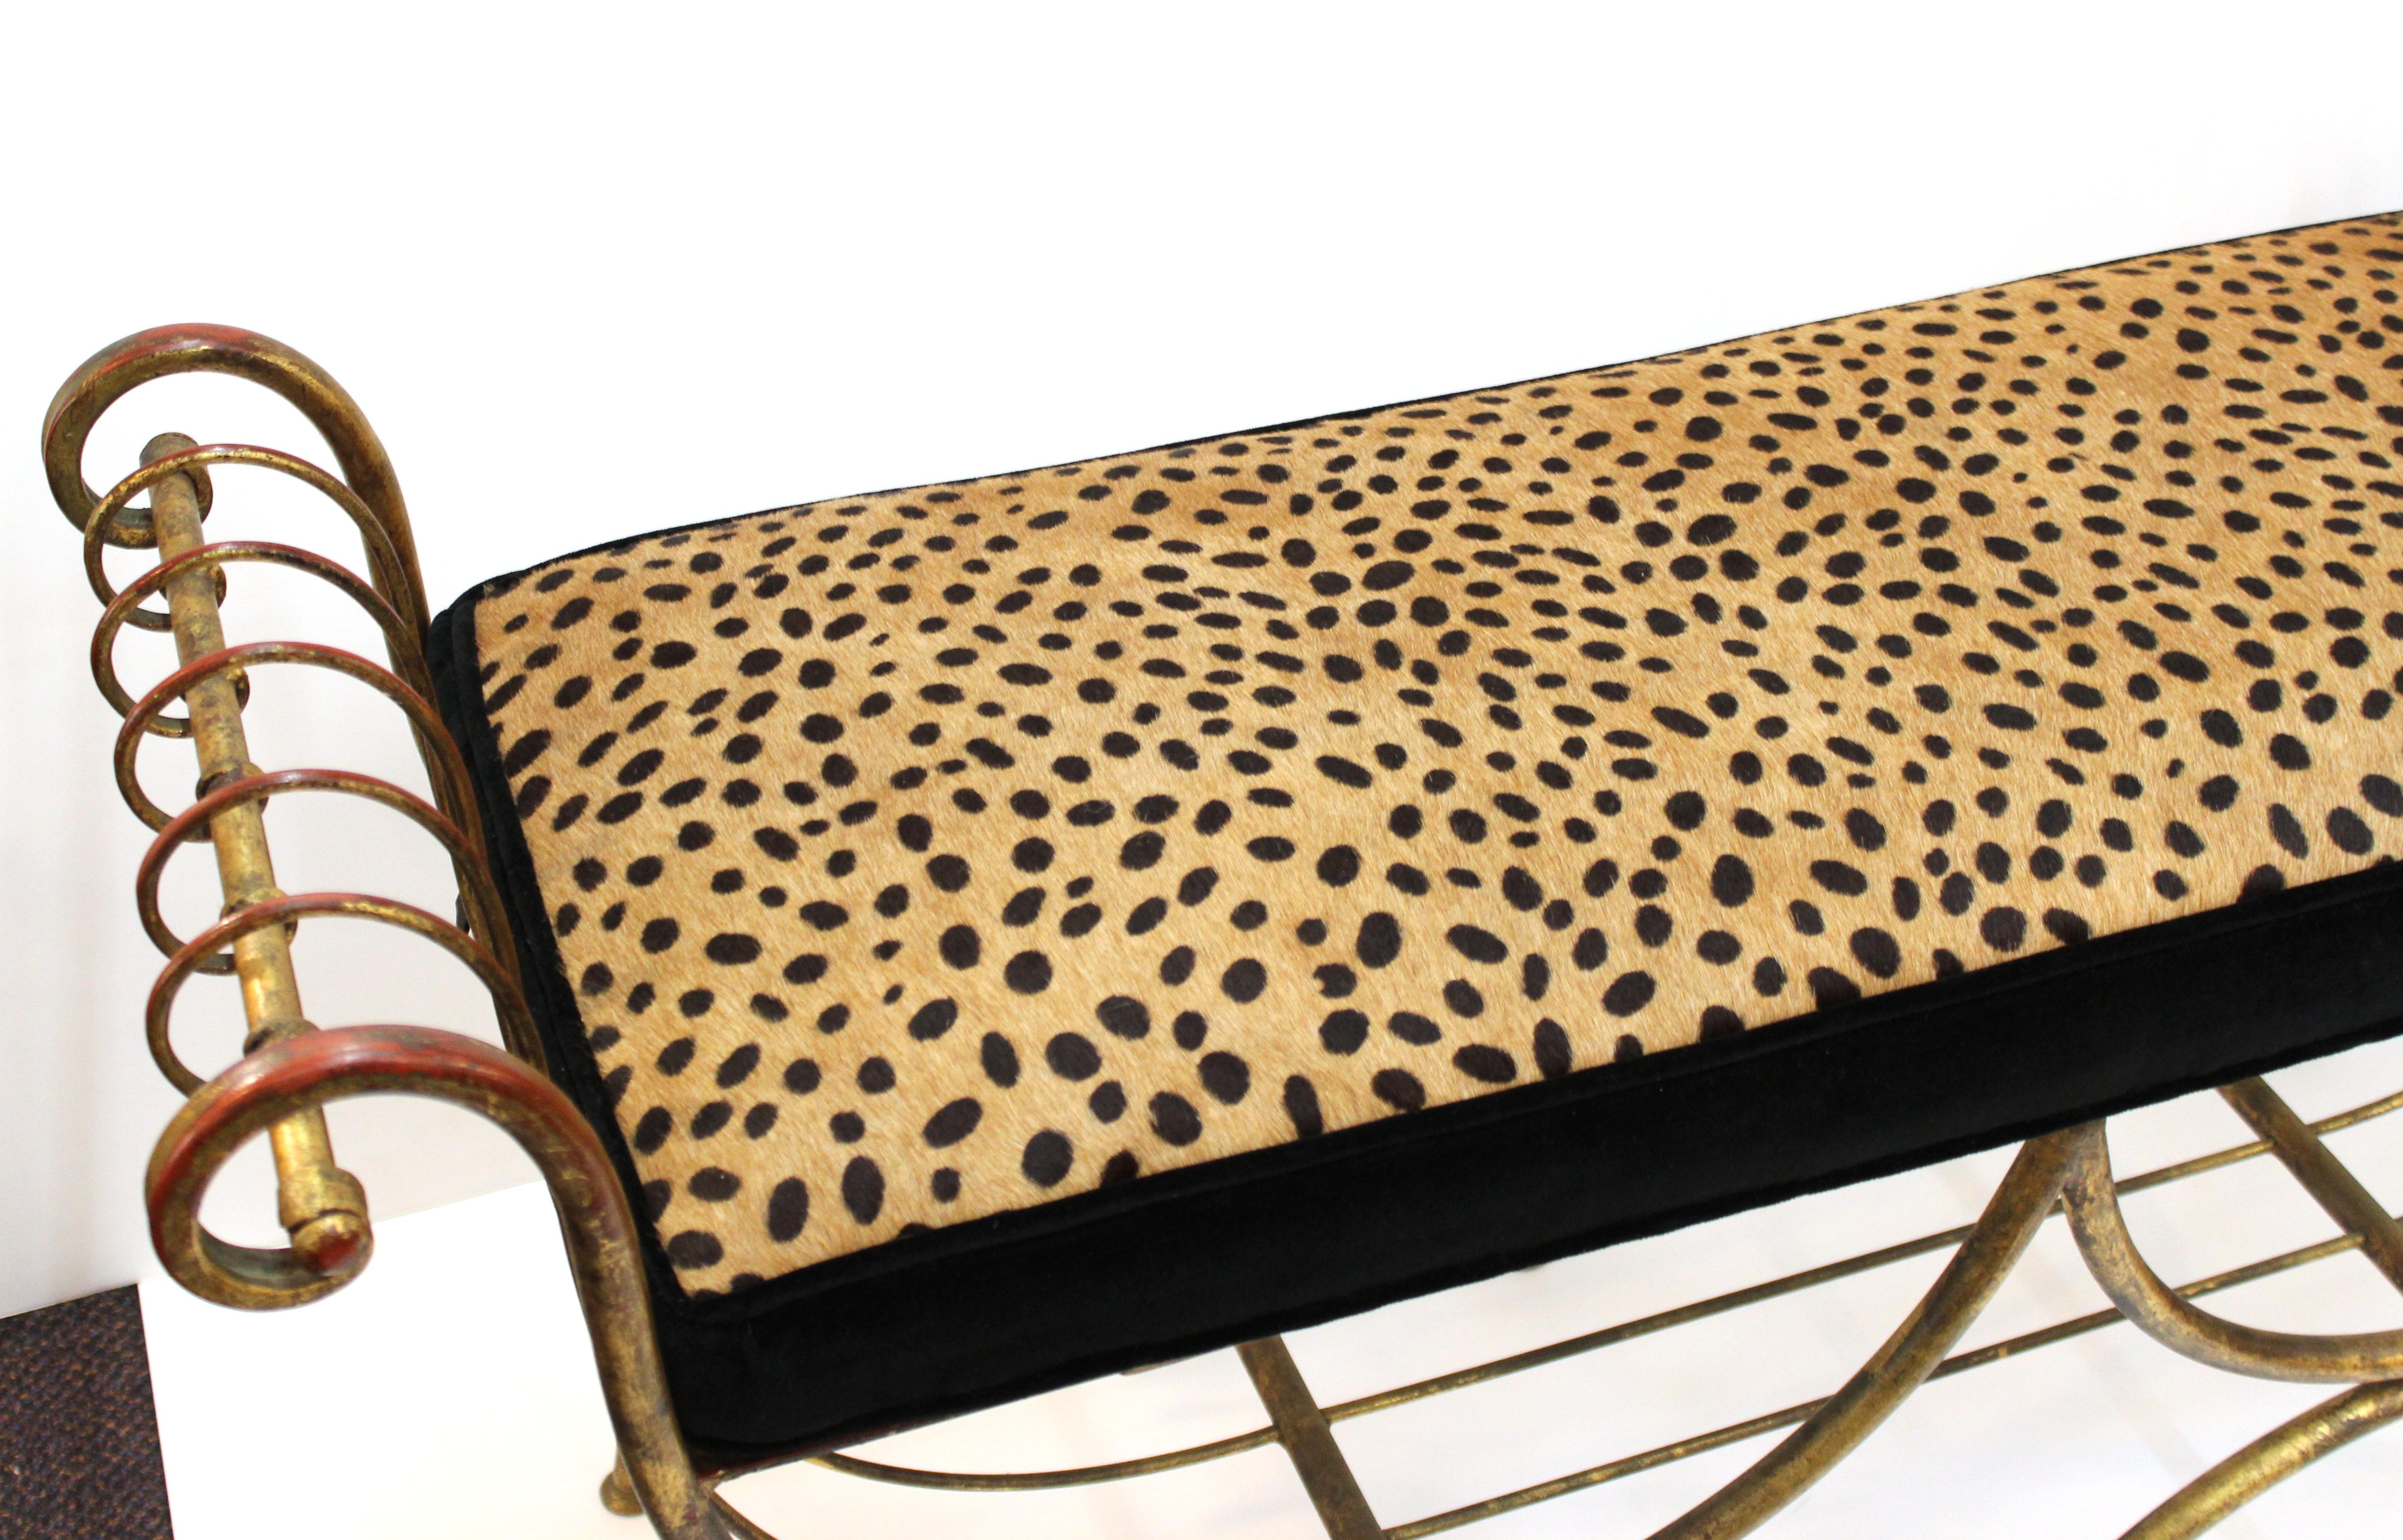 Italian Mid-Century Modern Bench in Gilt Iron with Faux Leopard Leather Seat 2